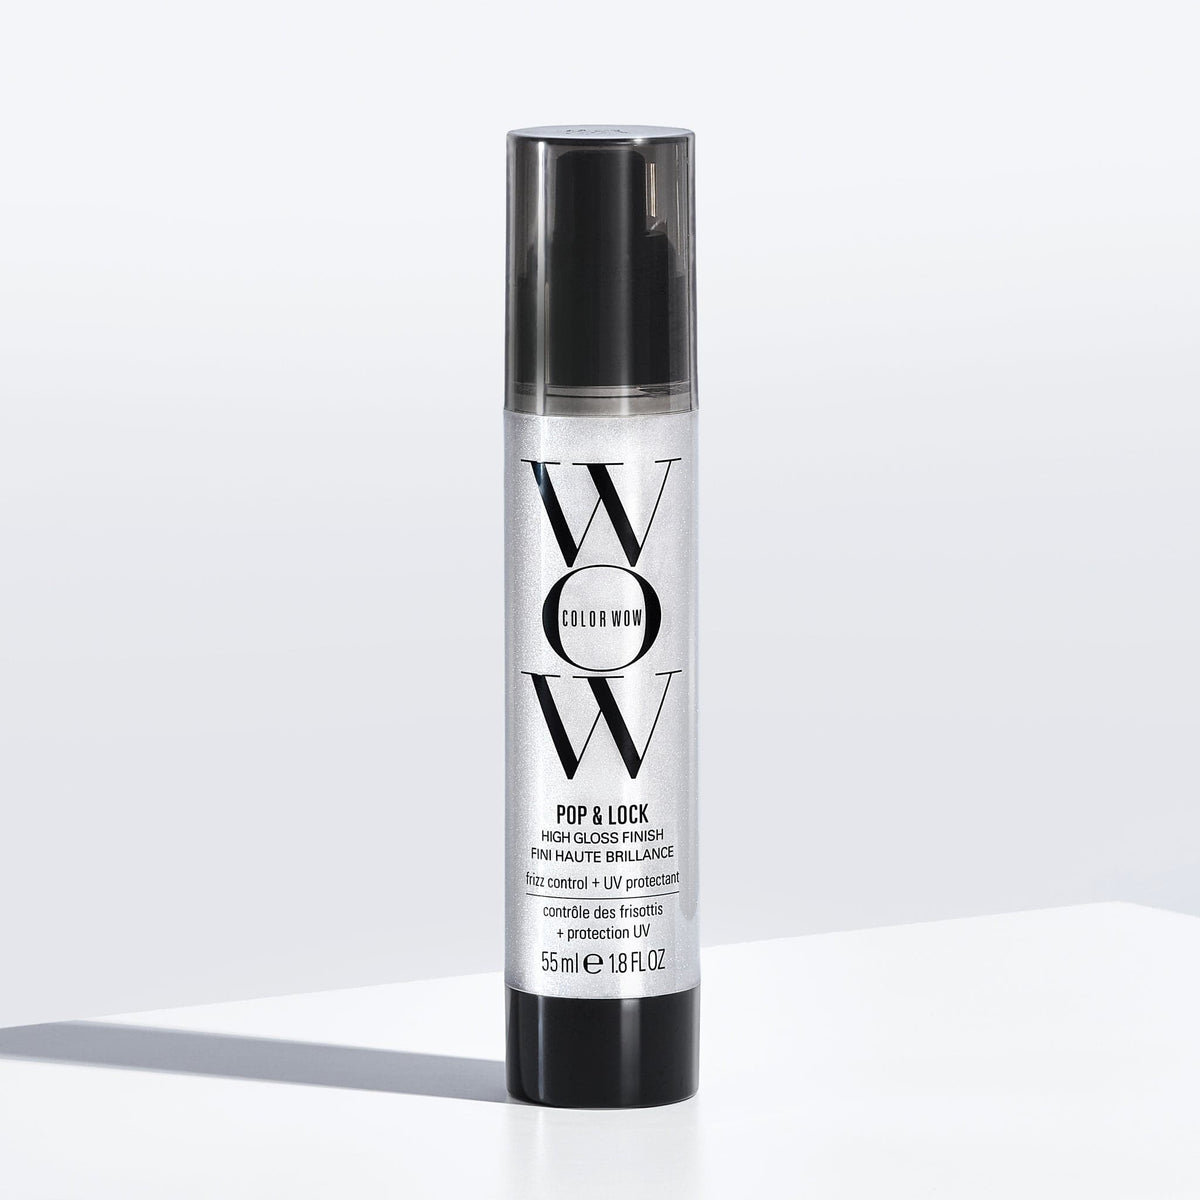 Chris Appleton Collaborates With Color Wow on First Hair Product